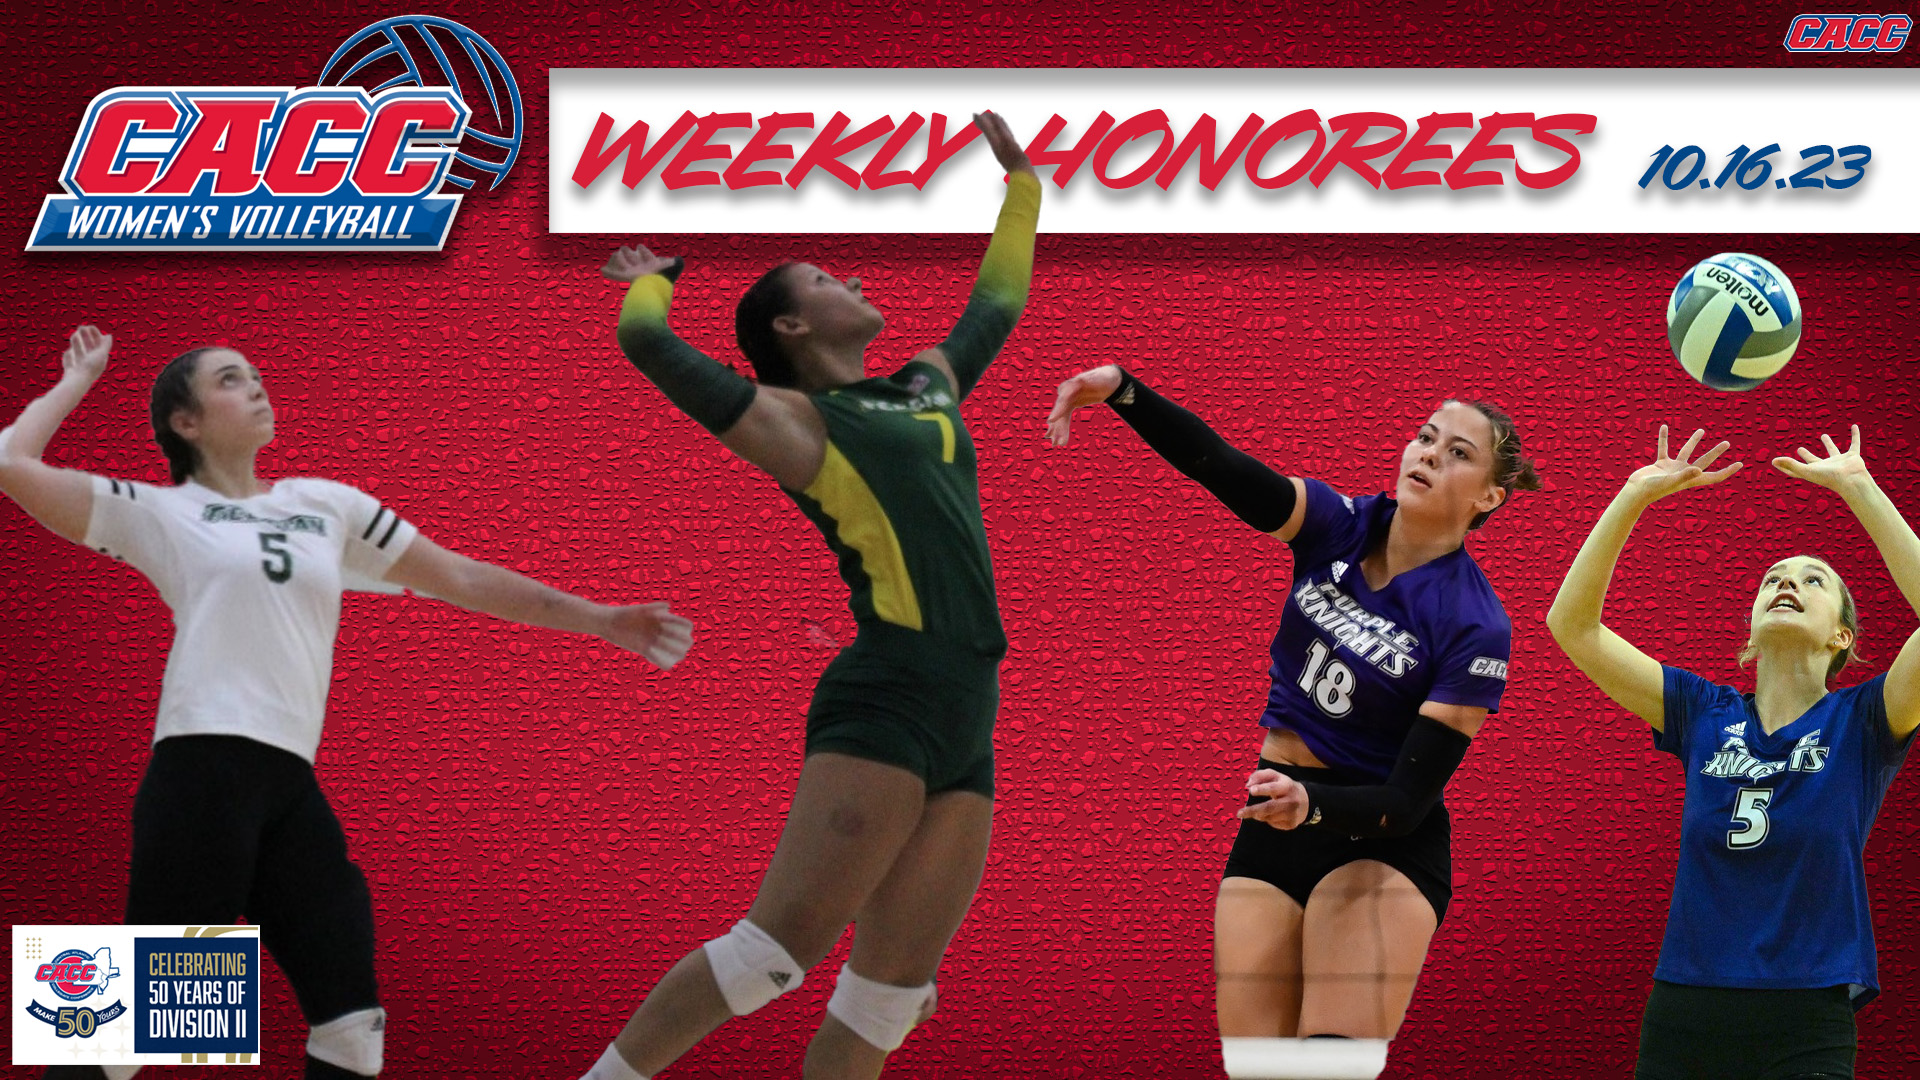 CACC Women's Volleyball Weekly Honorees (10-16-23)